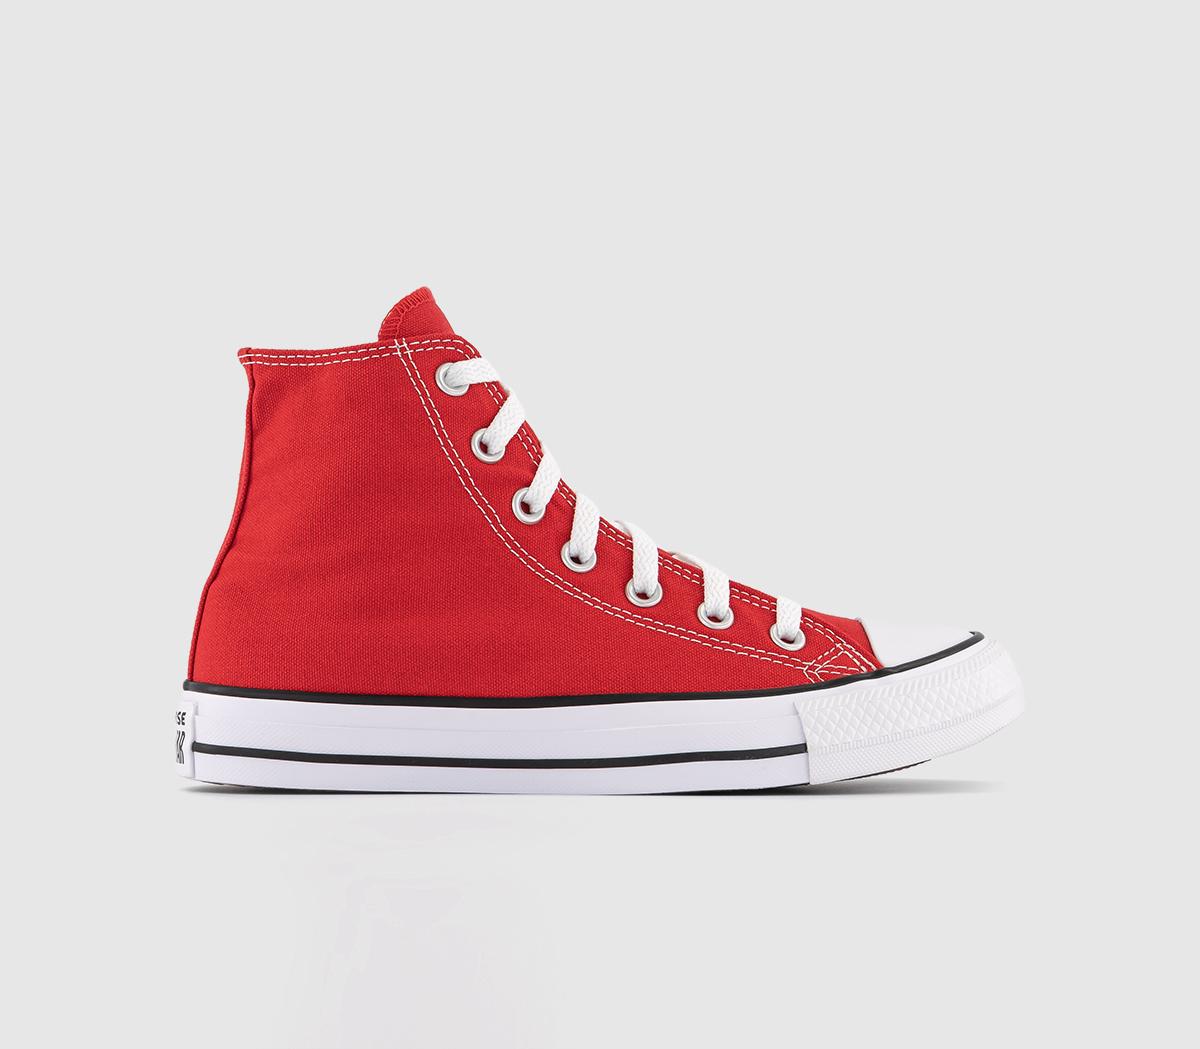 Converse All Star Hi Red Canvas - Unisex Sports